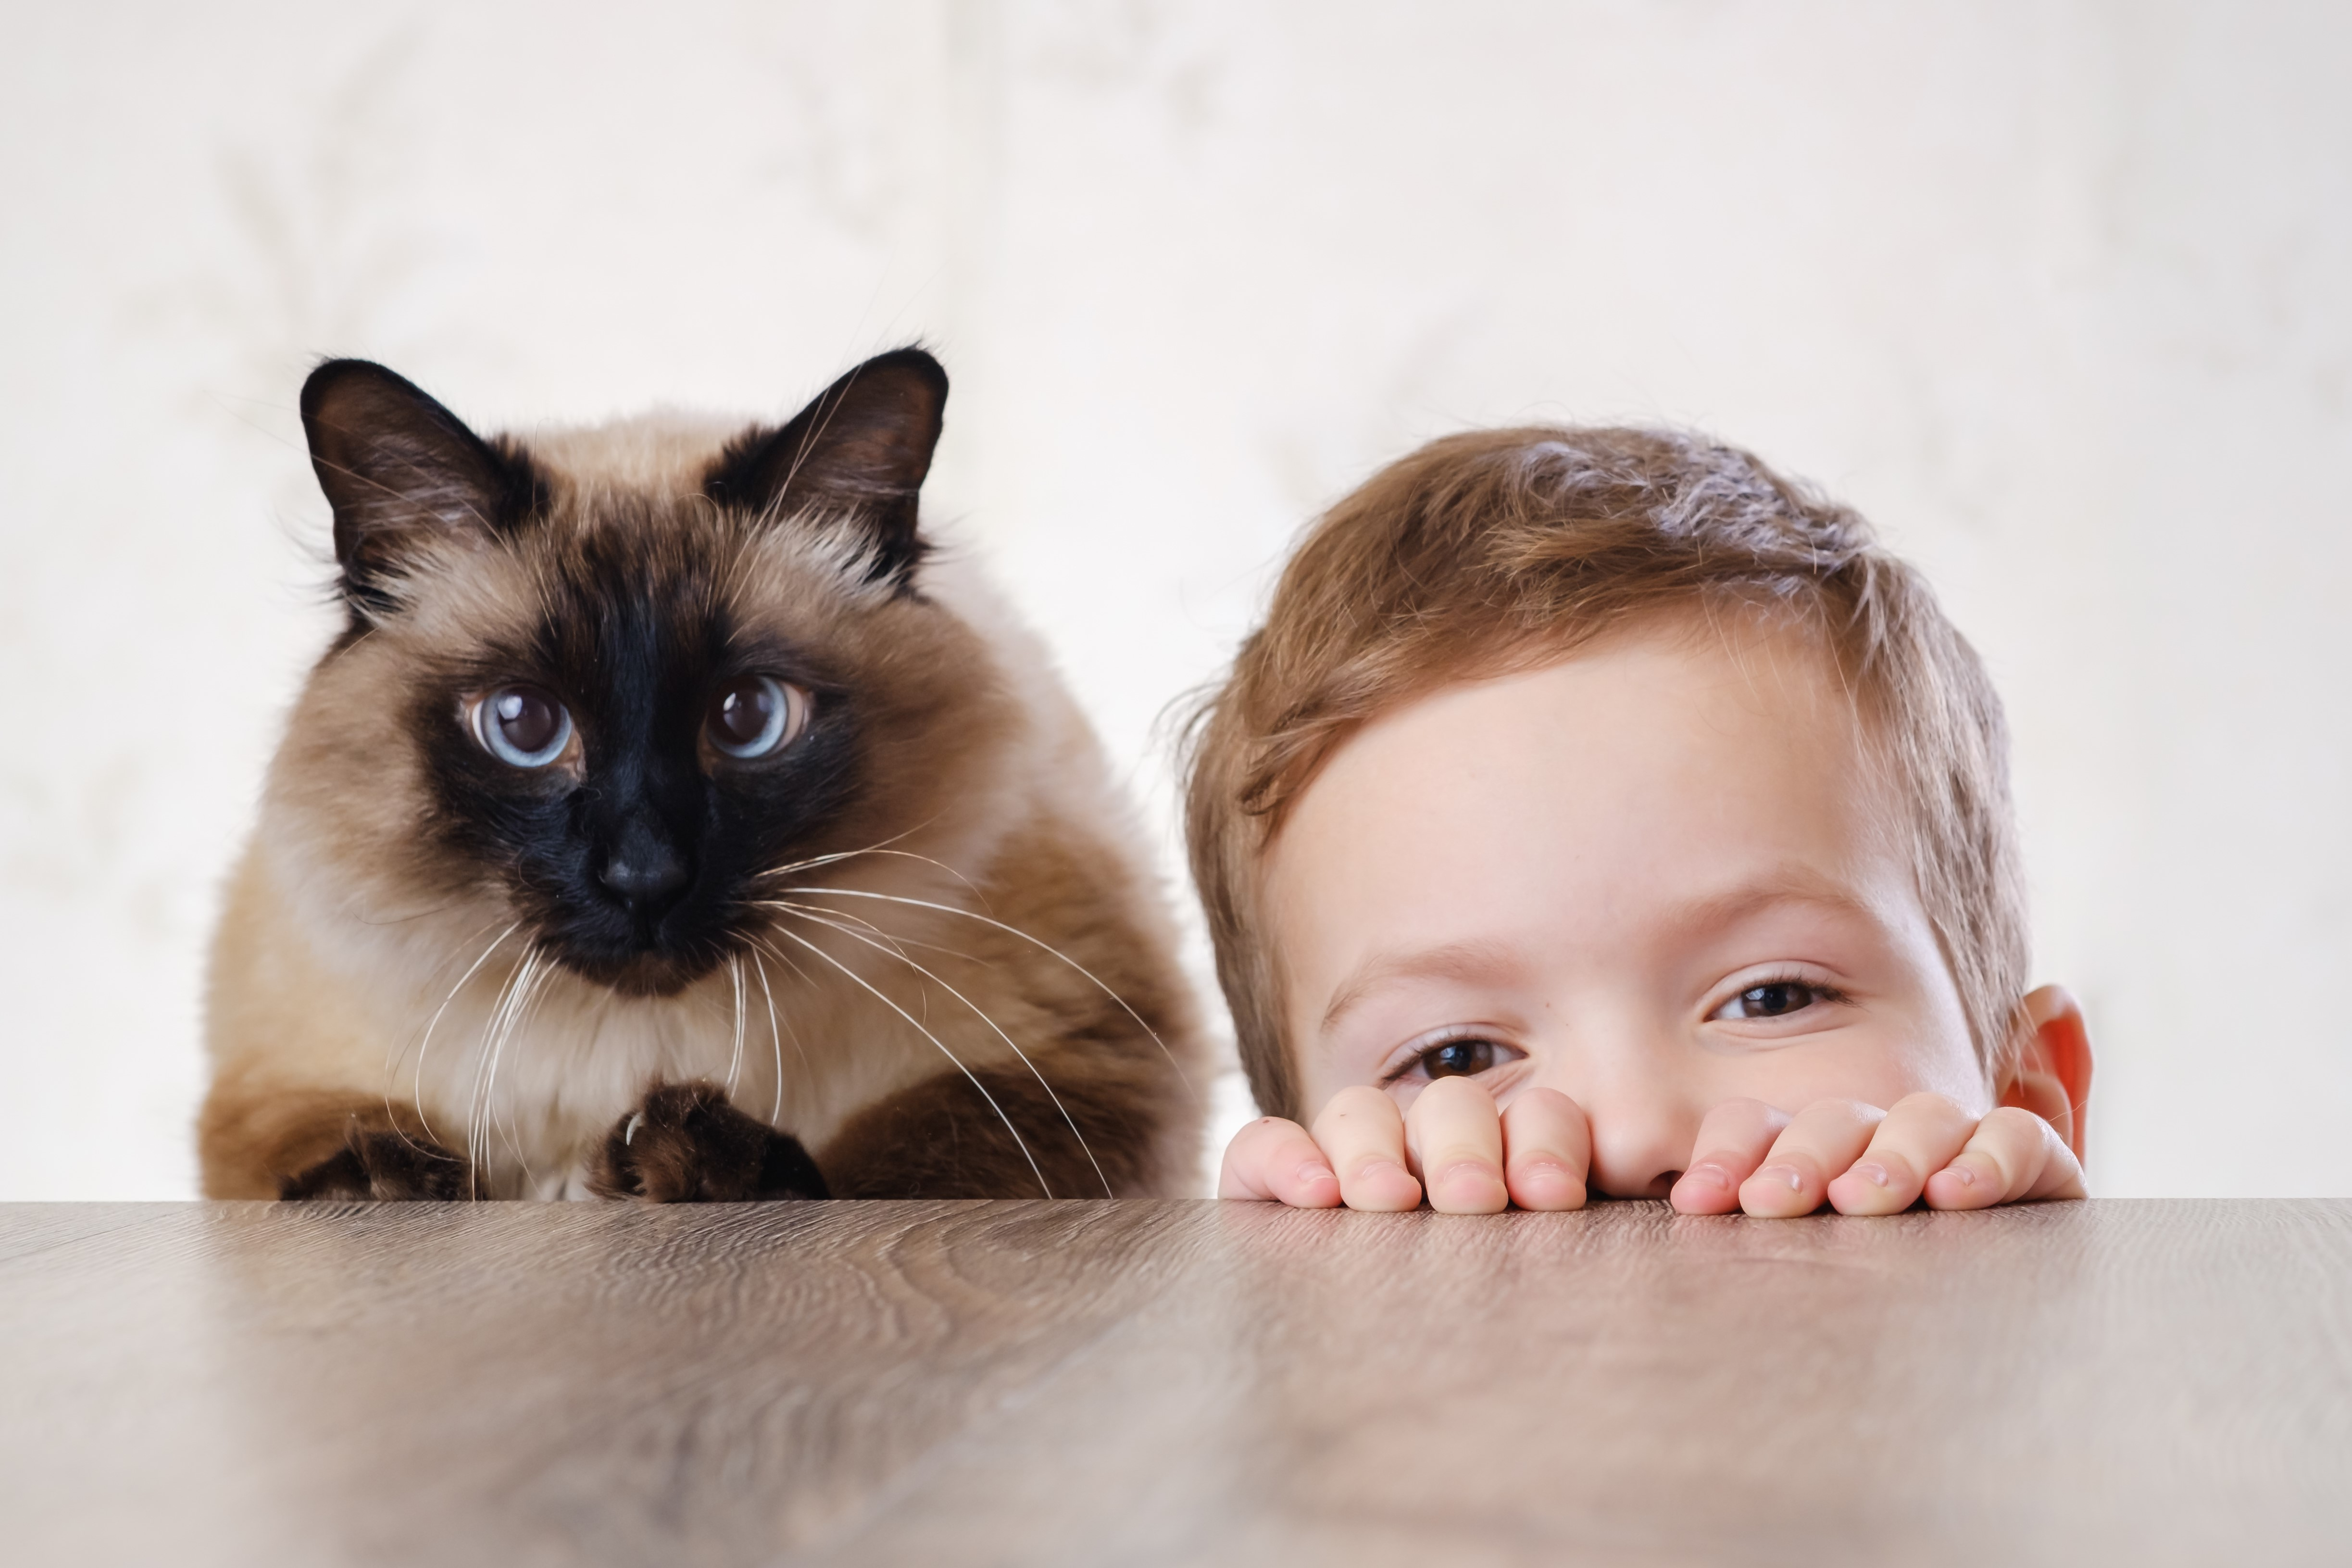 What "Type" of Cat is Best to Have Around Kids?